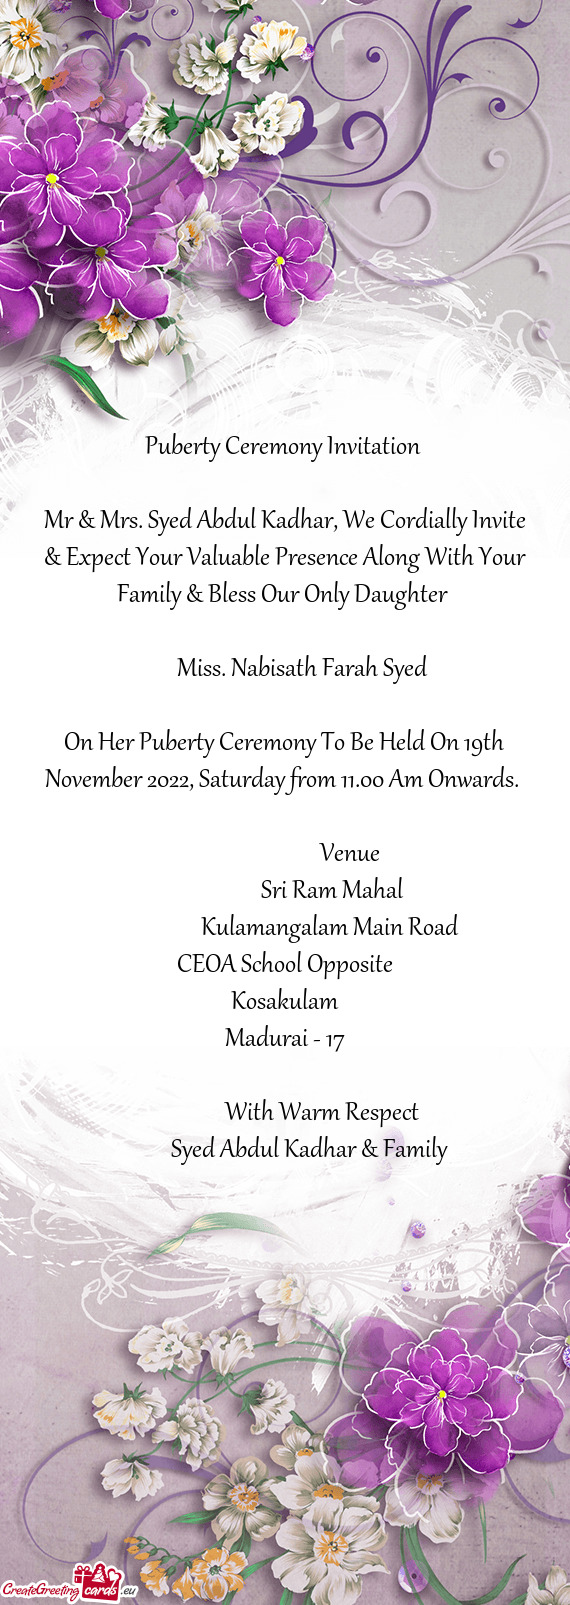 On Her Puberty Ceremony To Be Held On 19th November 2022, Saturday from 11.00 Am Onwards